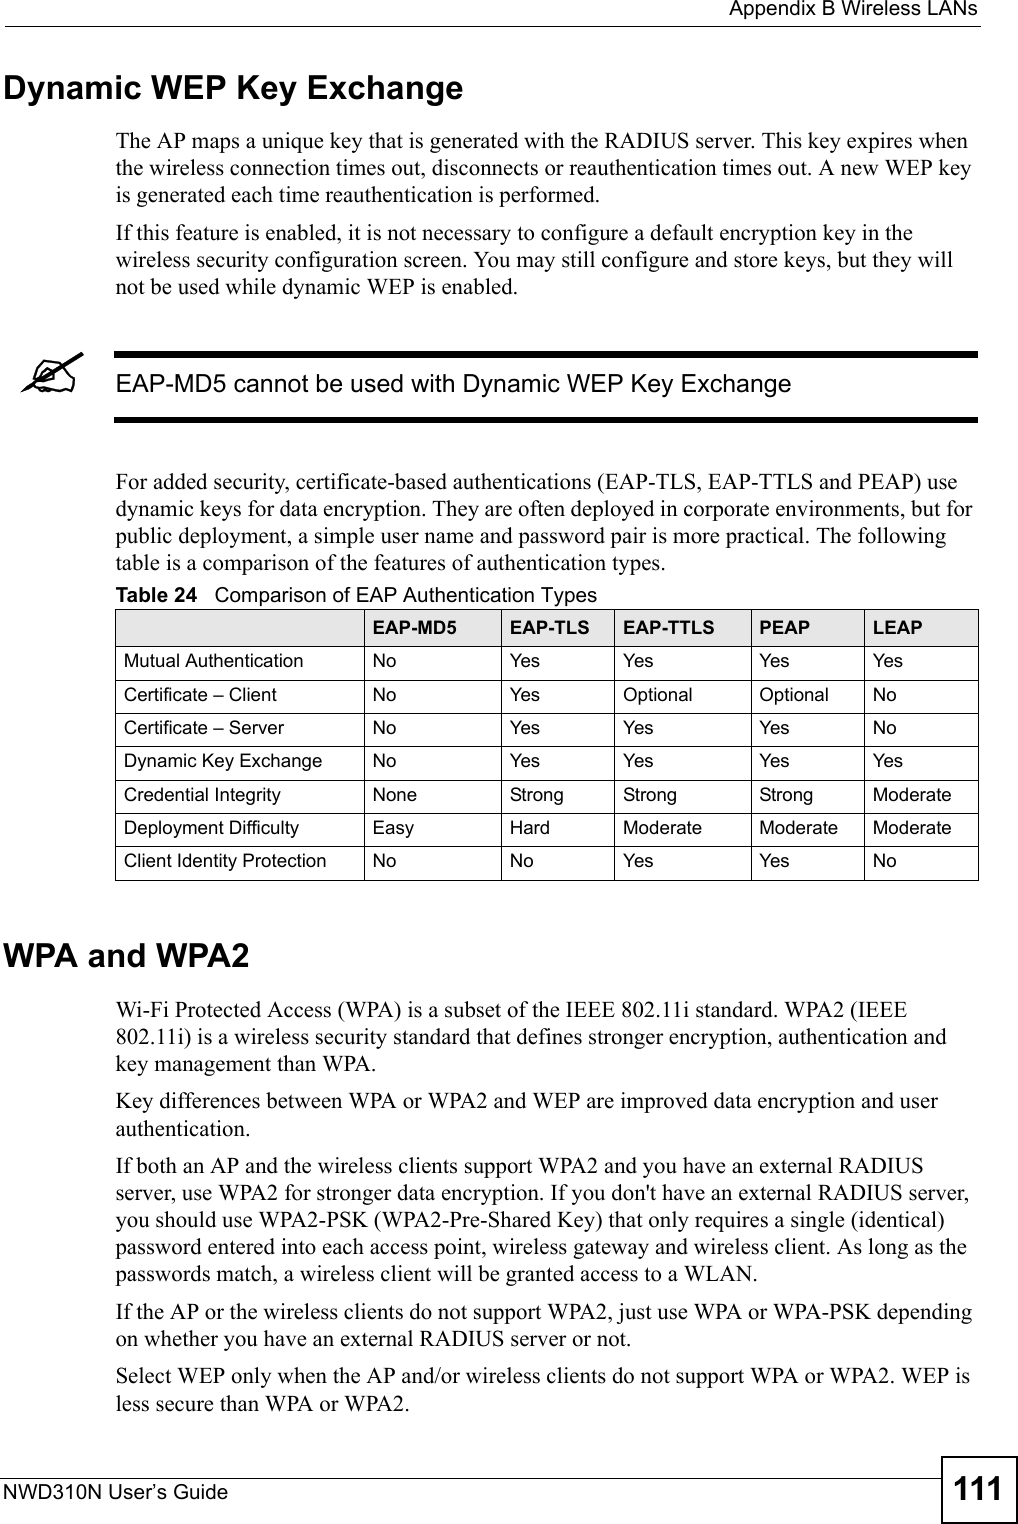  Appendix B Wireless LANsNWD310N User’s Guide 111Dynamic WEP Key ExchangeThe AP maps a unique key that is generated with the RADIUS server. This key expires when the wireless connection times out, disconnects or reauthentication times out. A new WEP key is generated each time reauthentication is performed.If this feature is enabled, it is not necessary to configure a default encryption key in the wireless security configuration screen. You may still configure and store keys, but they will not be used while dynamic WEP is enabled.&quot;EAP-MD5 cannot be used with Dynamic WEP Key ExchangeFor added security, certificate-based authentications (EAP-TLS, EAP-TTLS and PEAP) use dynamic keys for data encryption. They are often deployed in corporate environments, but for public deployment, a simple user name and password pair is more practical. The following table is a comparison of the features of authentication types.WPA and WPA2Wi-Fi Protected Access (WPA) is a subset of the IEEE 802.11i standard. WPA2 (IEEE 802.11i) is a wireless security standard that defines stronger encryption, authentication and key management than WPA. Key differences between WPA or WPA2 and WEP are improved data encryption and user authentication.If both an AP and the wireless clients support WPA2 and you have an external RADIUS server, use WPA2 for stronger data encryption. If you don&apos;t have an external RADIUS server, you should use WPA2-PSK (WPA2-Pre-Shared Key) that only requires a single (identical) password entered into each access point, wireless gateway and wireless client. As long as the passwords match, a wireless client will be granted access to a WLAN. If the AP or the wireless clients do not support WPA2, just use WPA or WPA-PSK depending on whether you have an external RADIUS server or not.Select WEP only when the AP and/or wireless clients do not support WPA or WPA2. WEP is less secure than WPA or WPA2.Table 24   Comparison of EAP Authentication TypesEAP-MD5 EAP-TLS EAP-TTLS PEAP LEAPMutual Authentication No Yes Yes Yes YesCertificate – Client No Yes Optional Optional NoCertificate – Server No Yes Yes Yes NoDynamic Key Exchange No Yes Yes Yes YesCredential Integrity None Strong Strong Strong ModerateDeployment Difficulty Easy Hard Moderate Moderate ModerateClient Identity Protection No No Yes Yes No